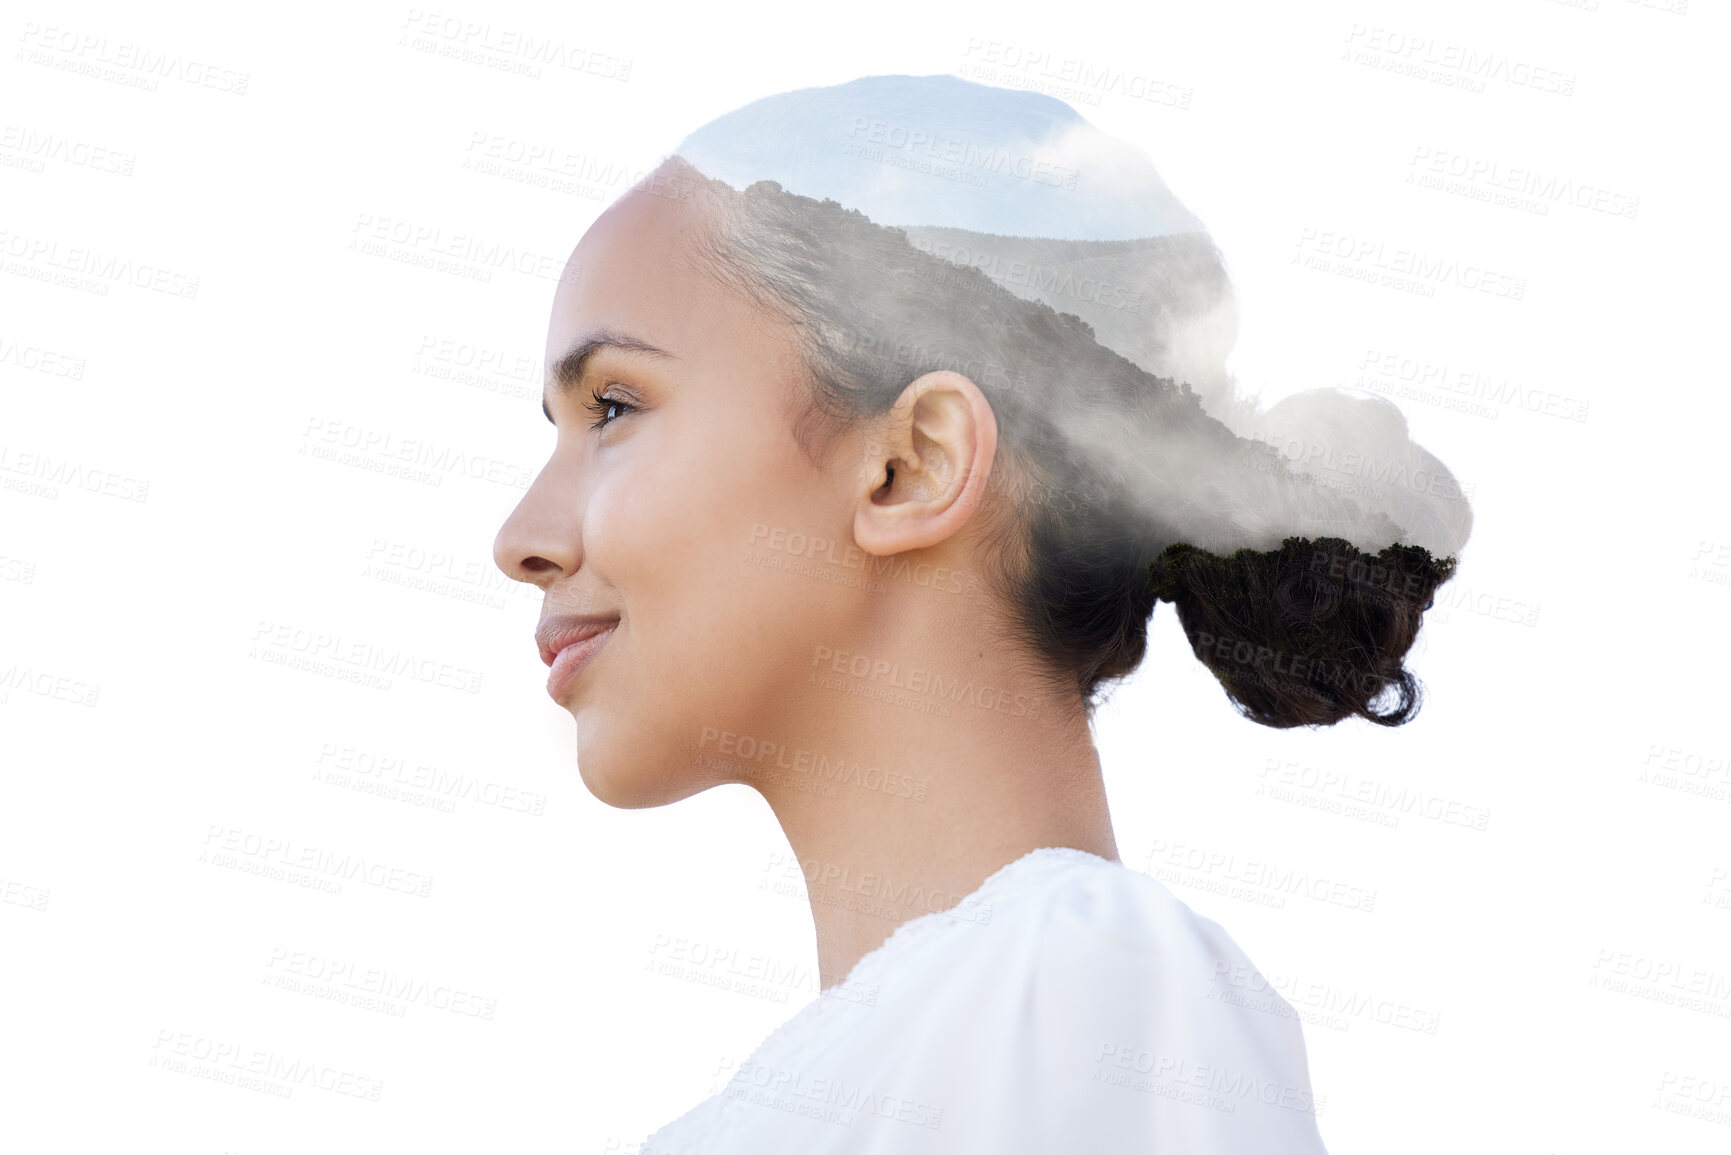 Buy stock photo Shot of a beautiful young woman with a mountain superimposed over her face against a white background